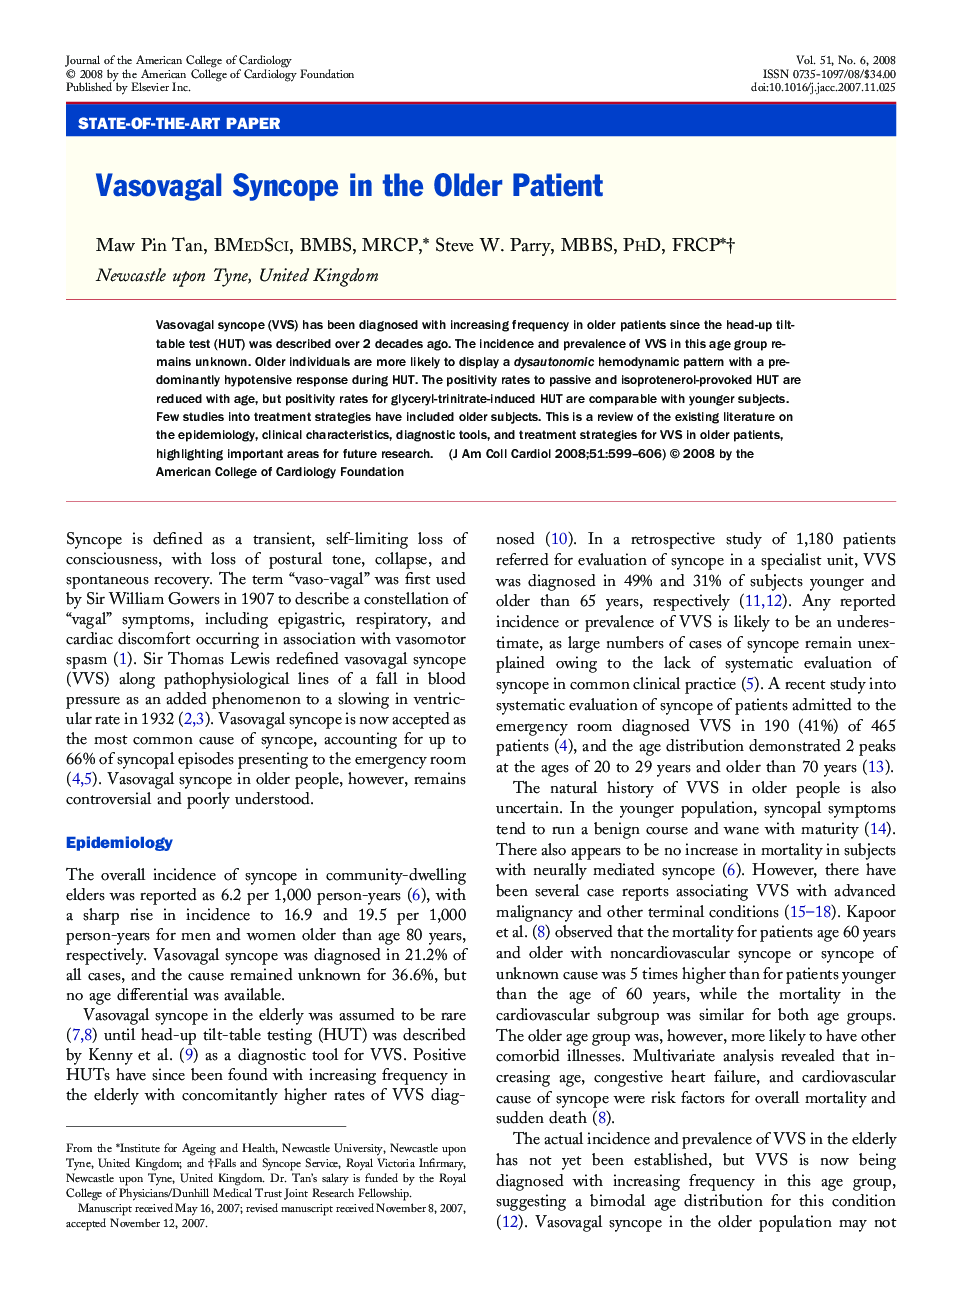 Vasovagal Syncope in the Older Patient